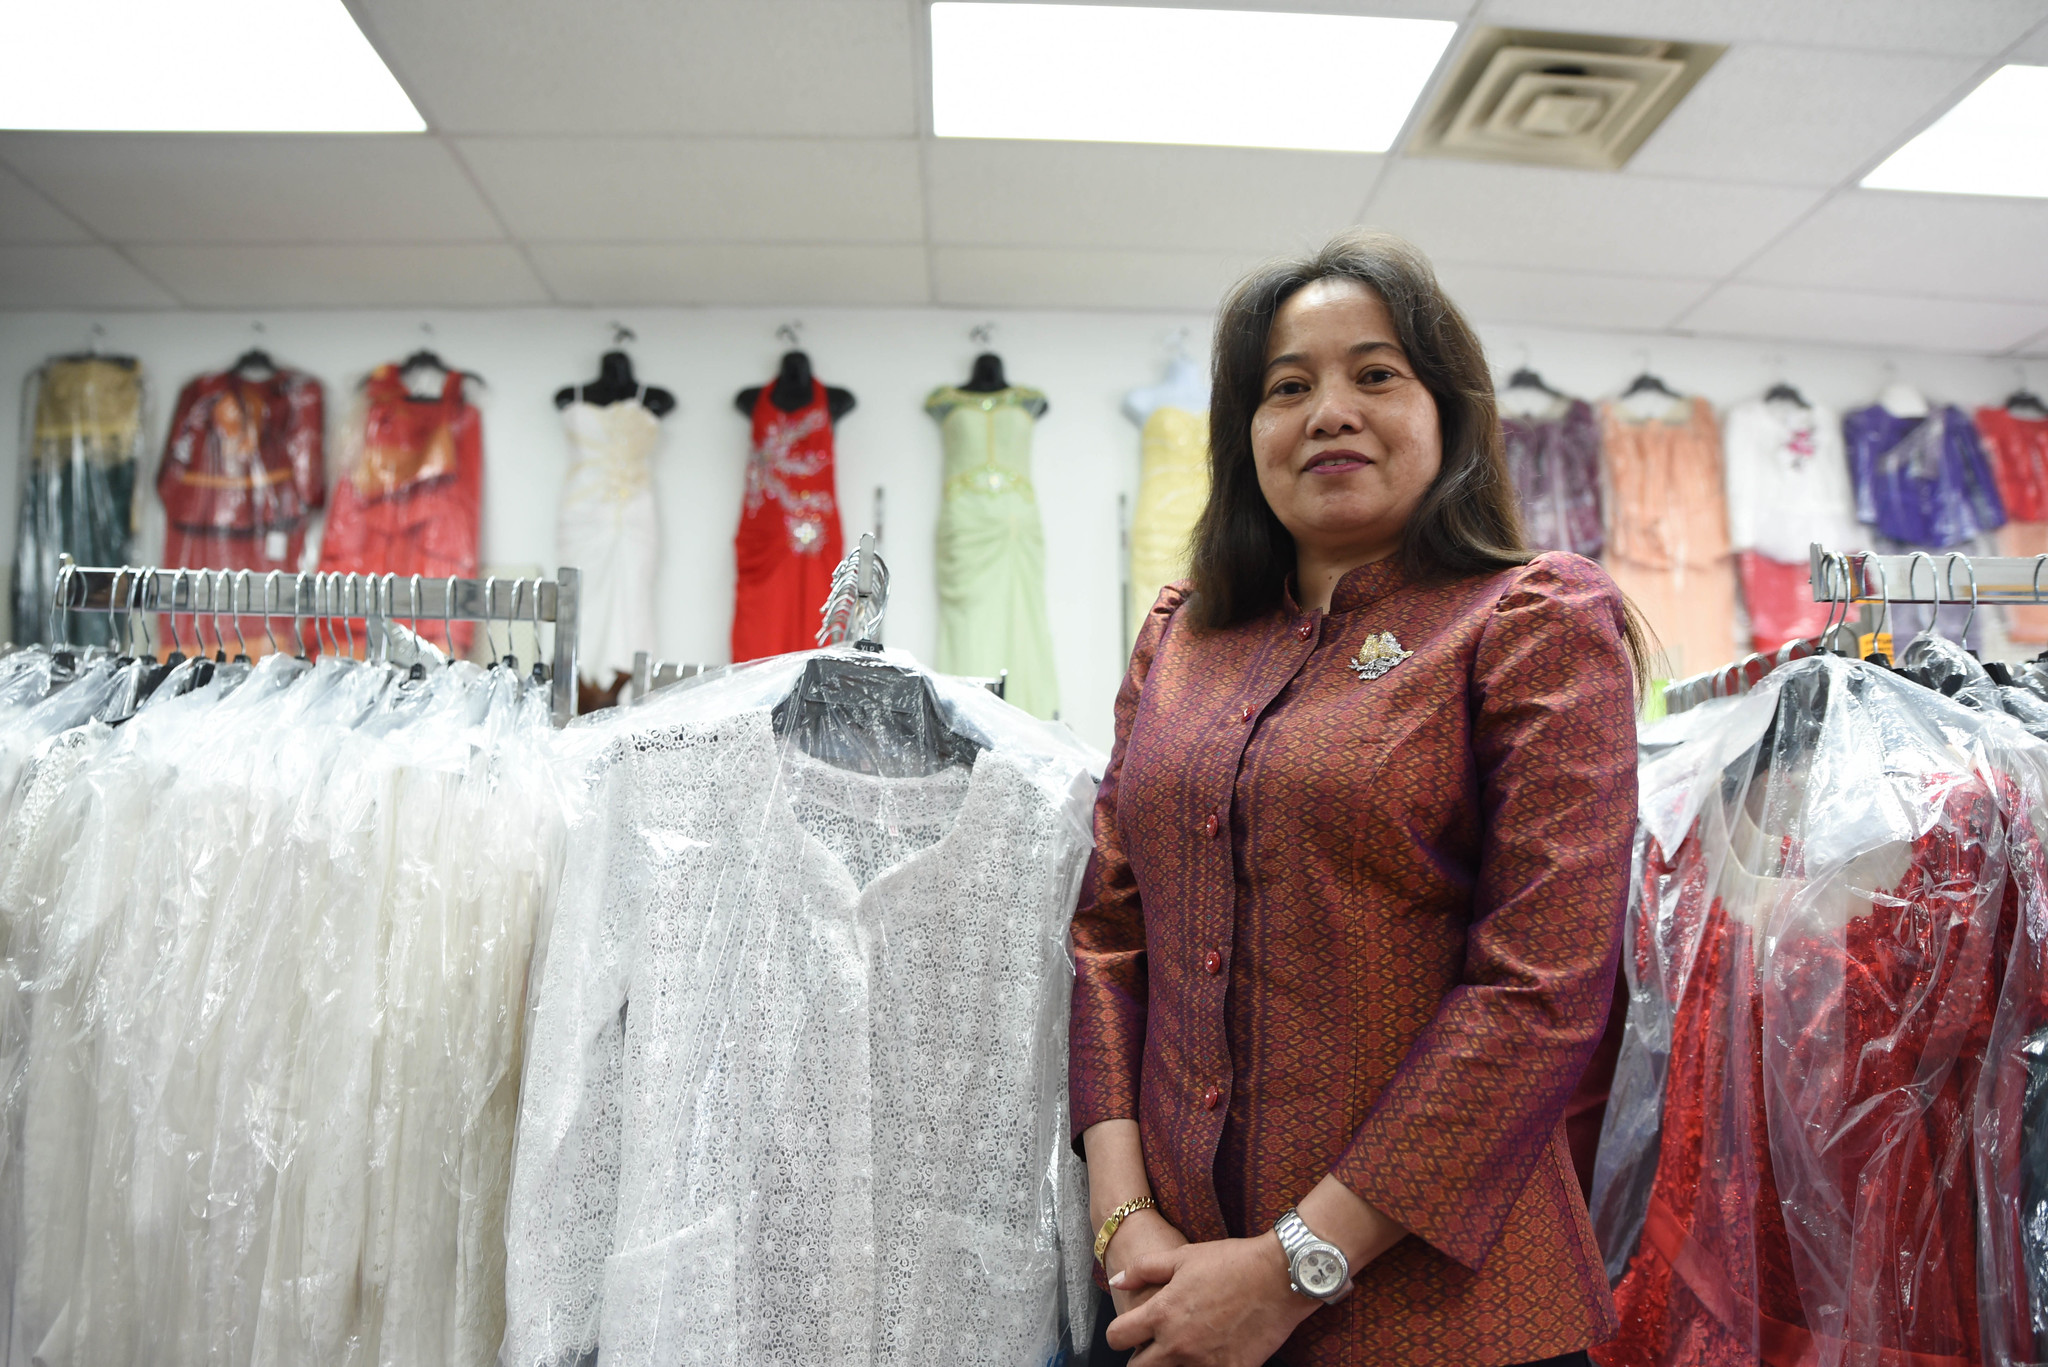 Phally Seng stands inside her clothing shop on South 7th Street.